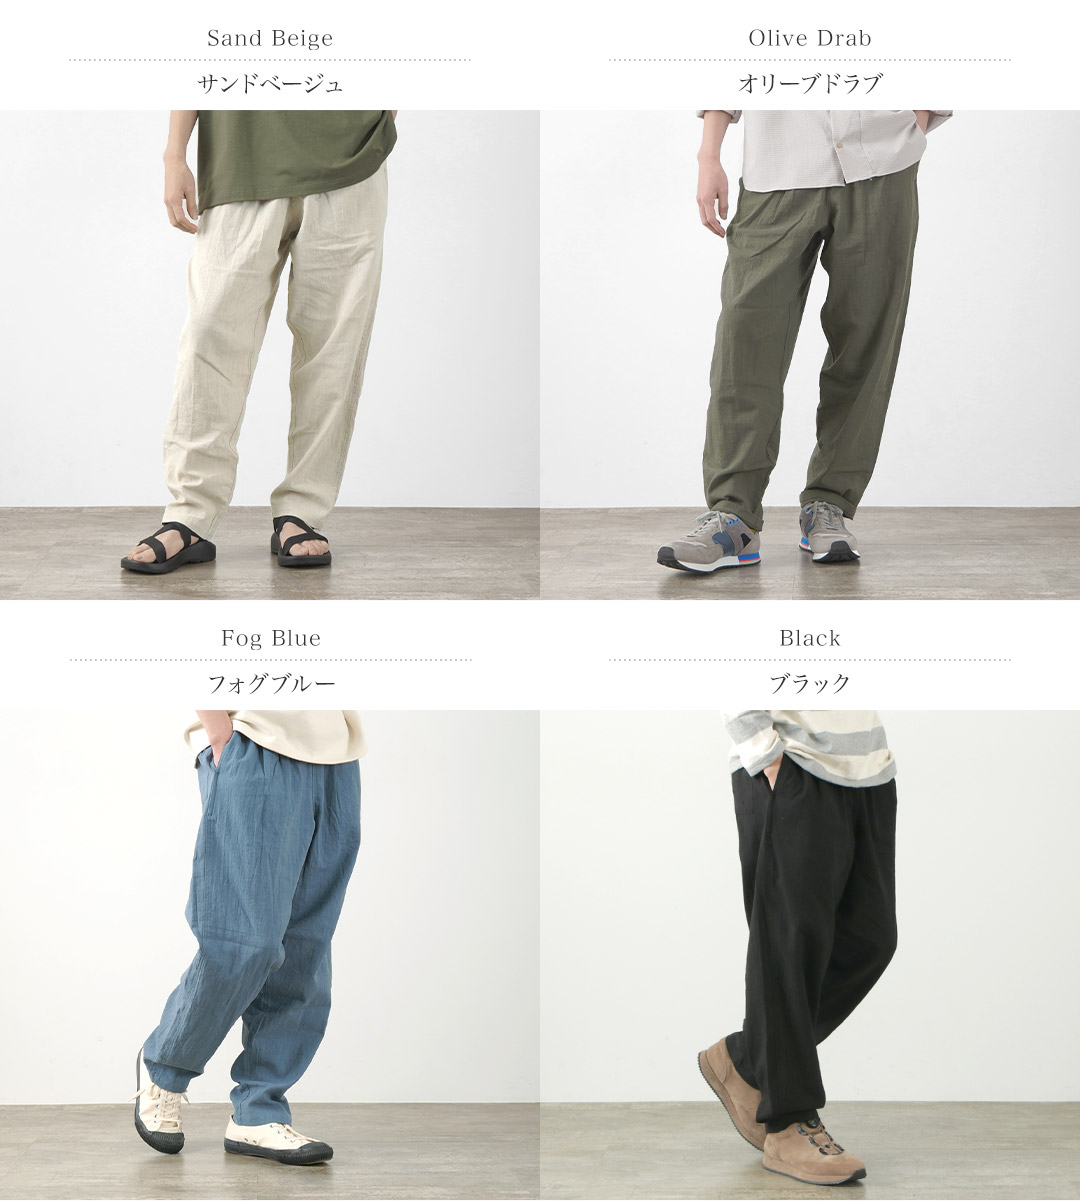 BURLAP OUTFITTER Track trousers Linen